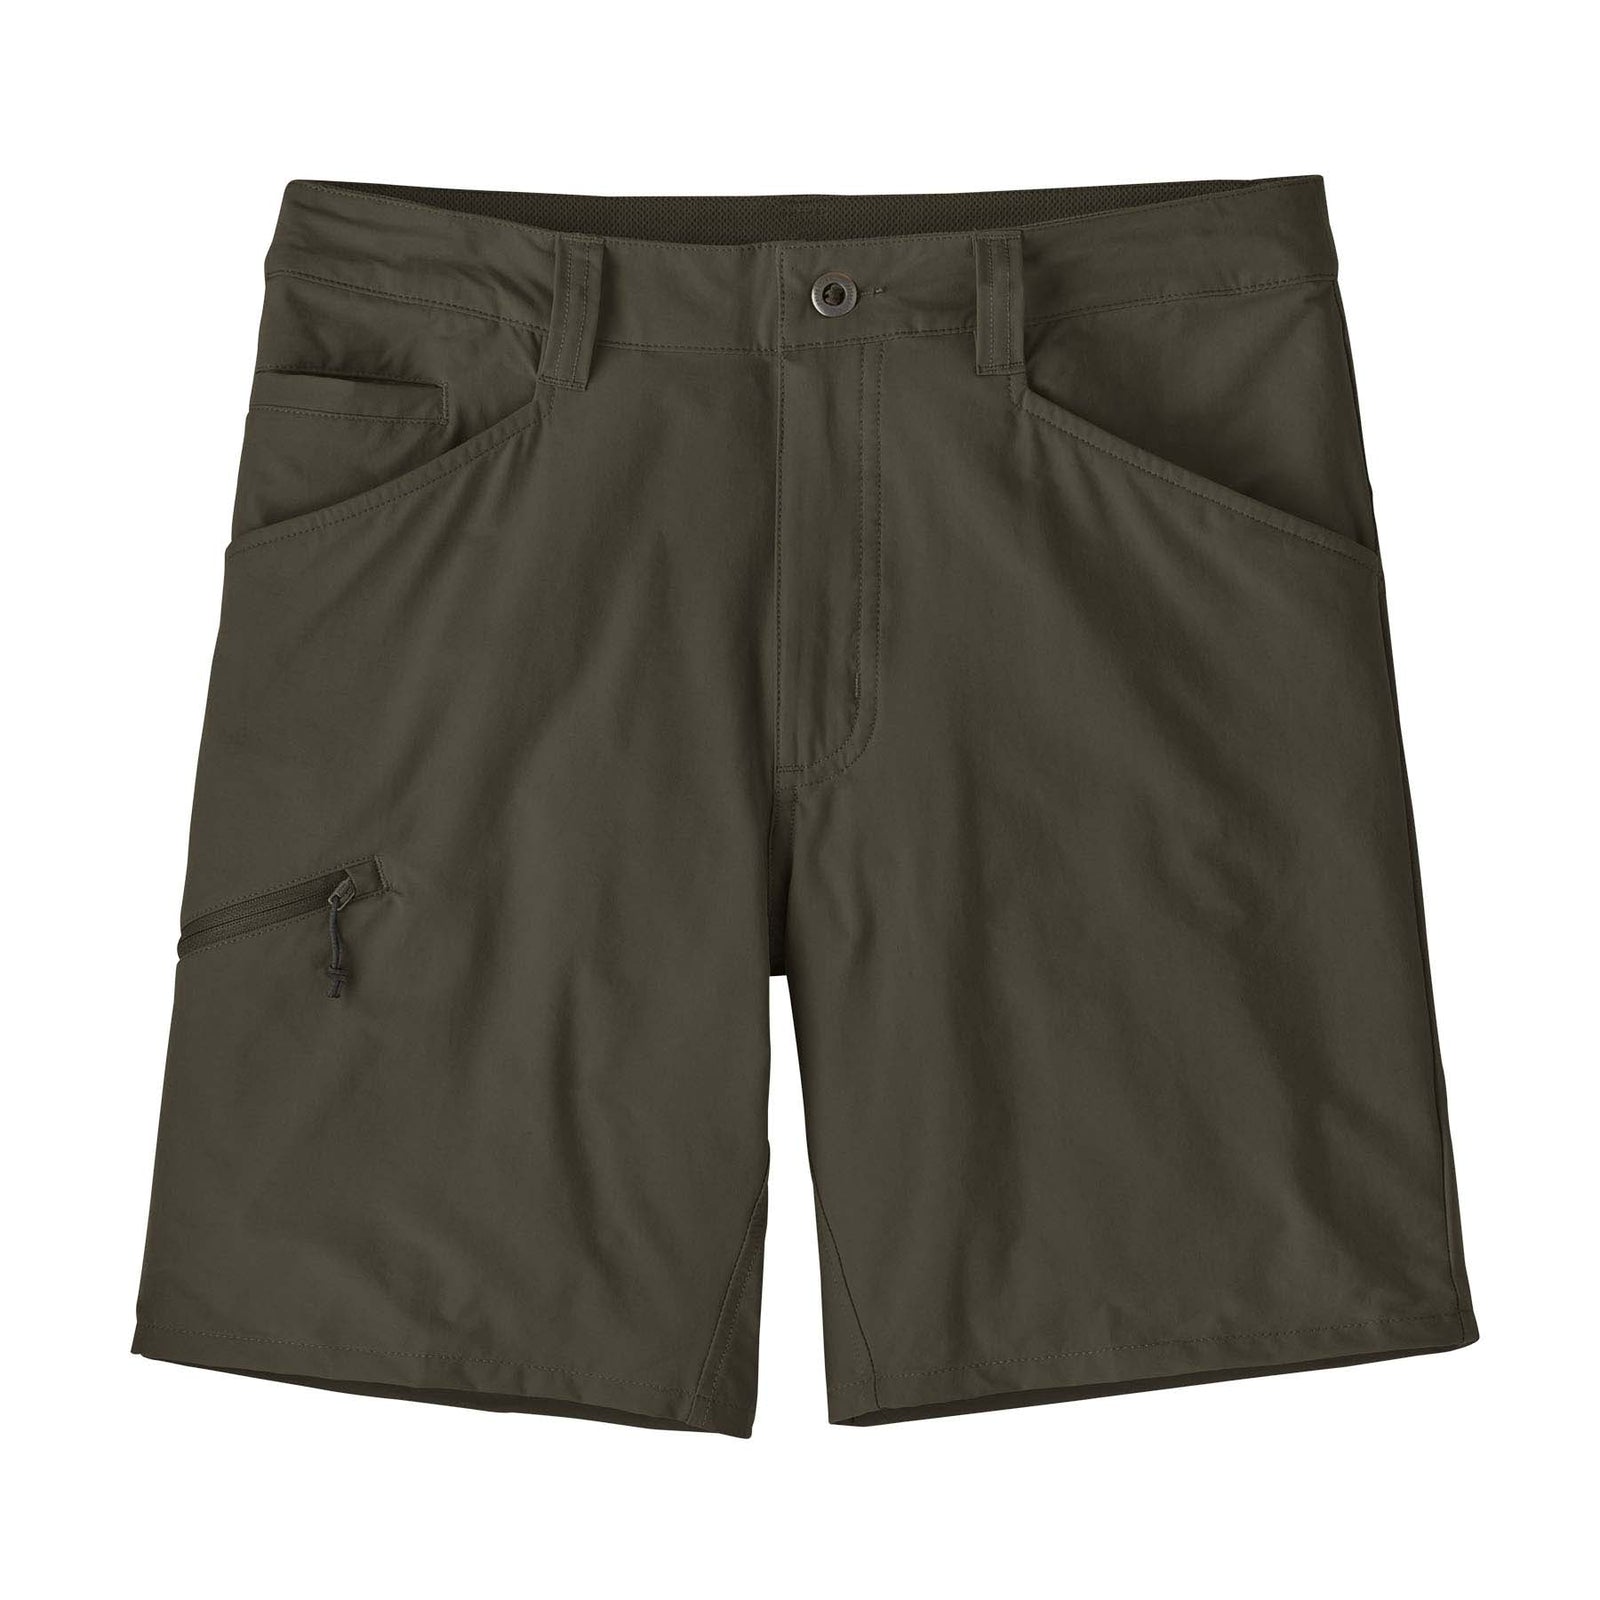 Patagonia Men's Quandary Shorts - 8 in. 2023 BSNG BASIN GREE